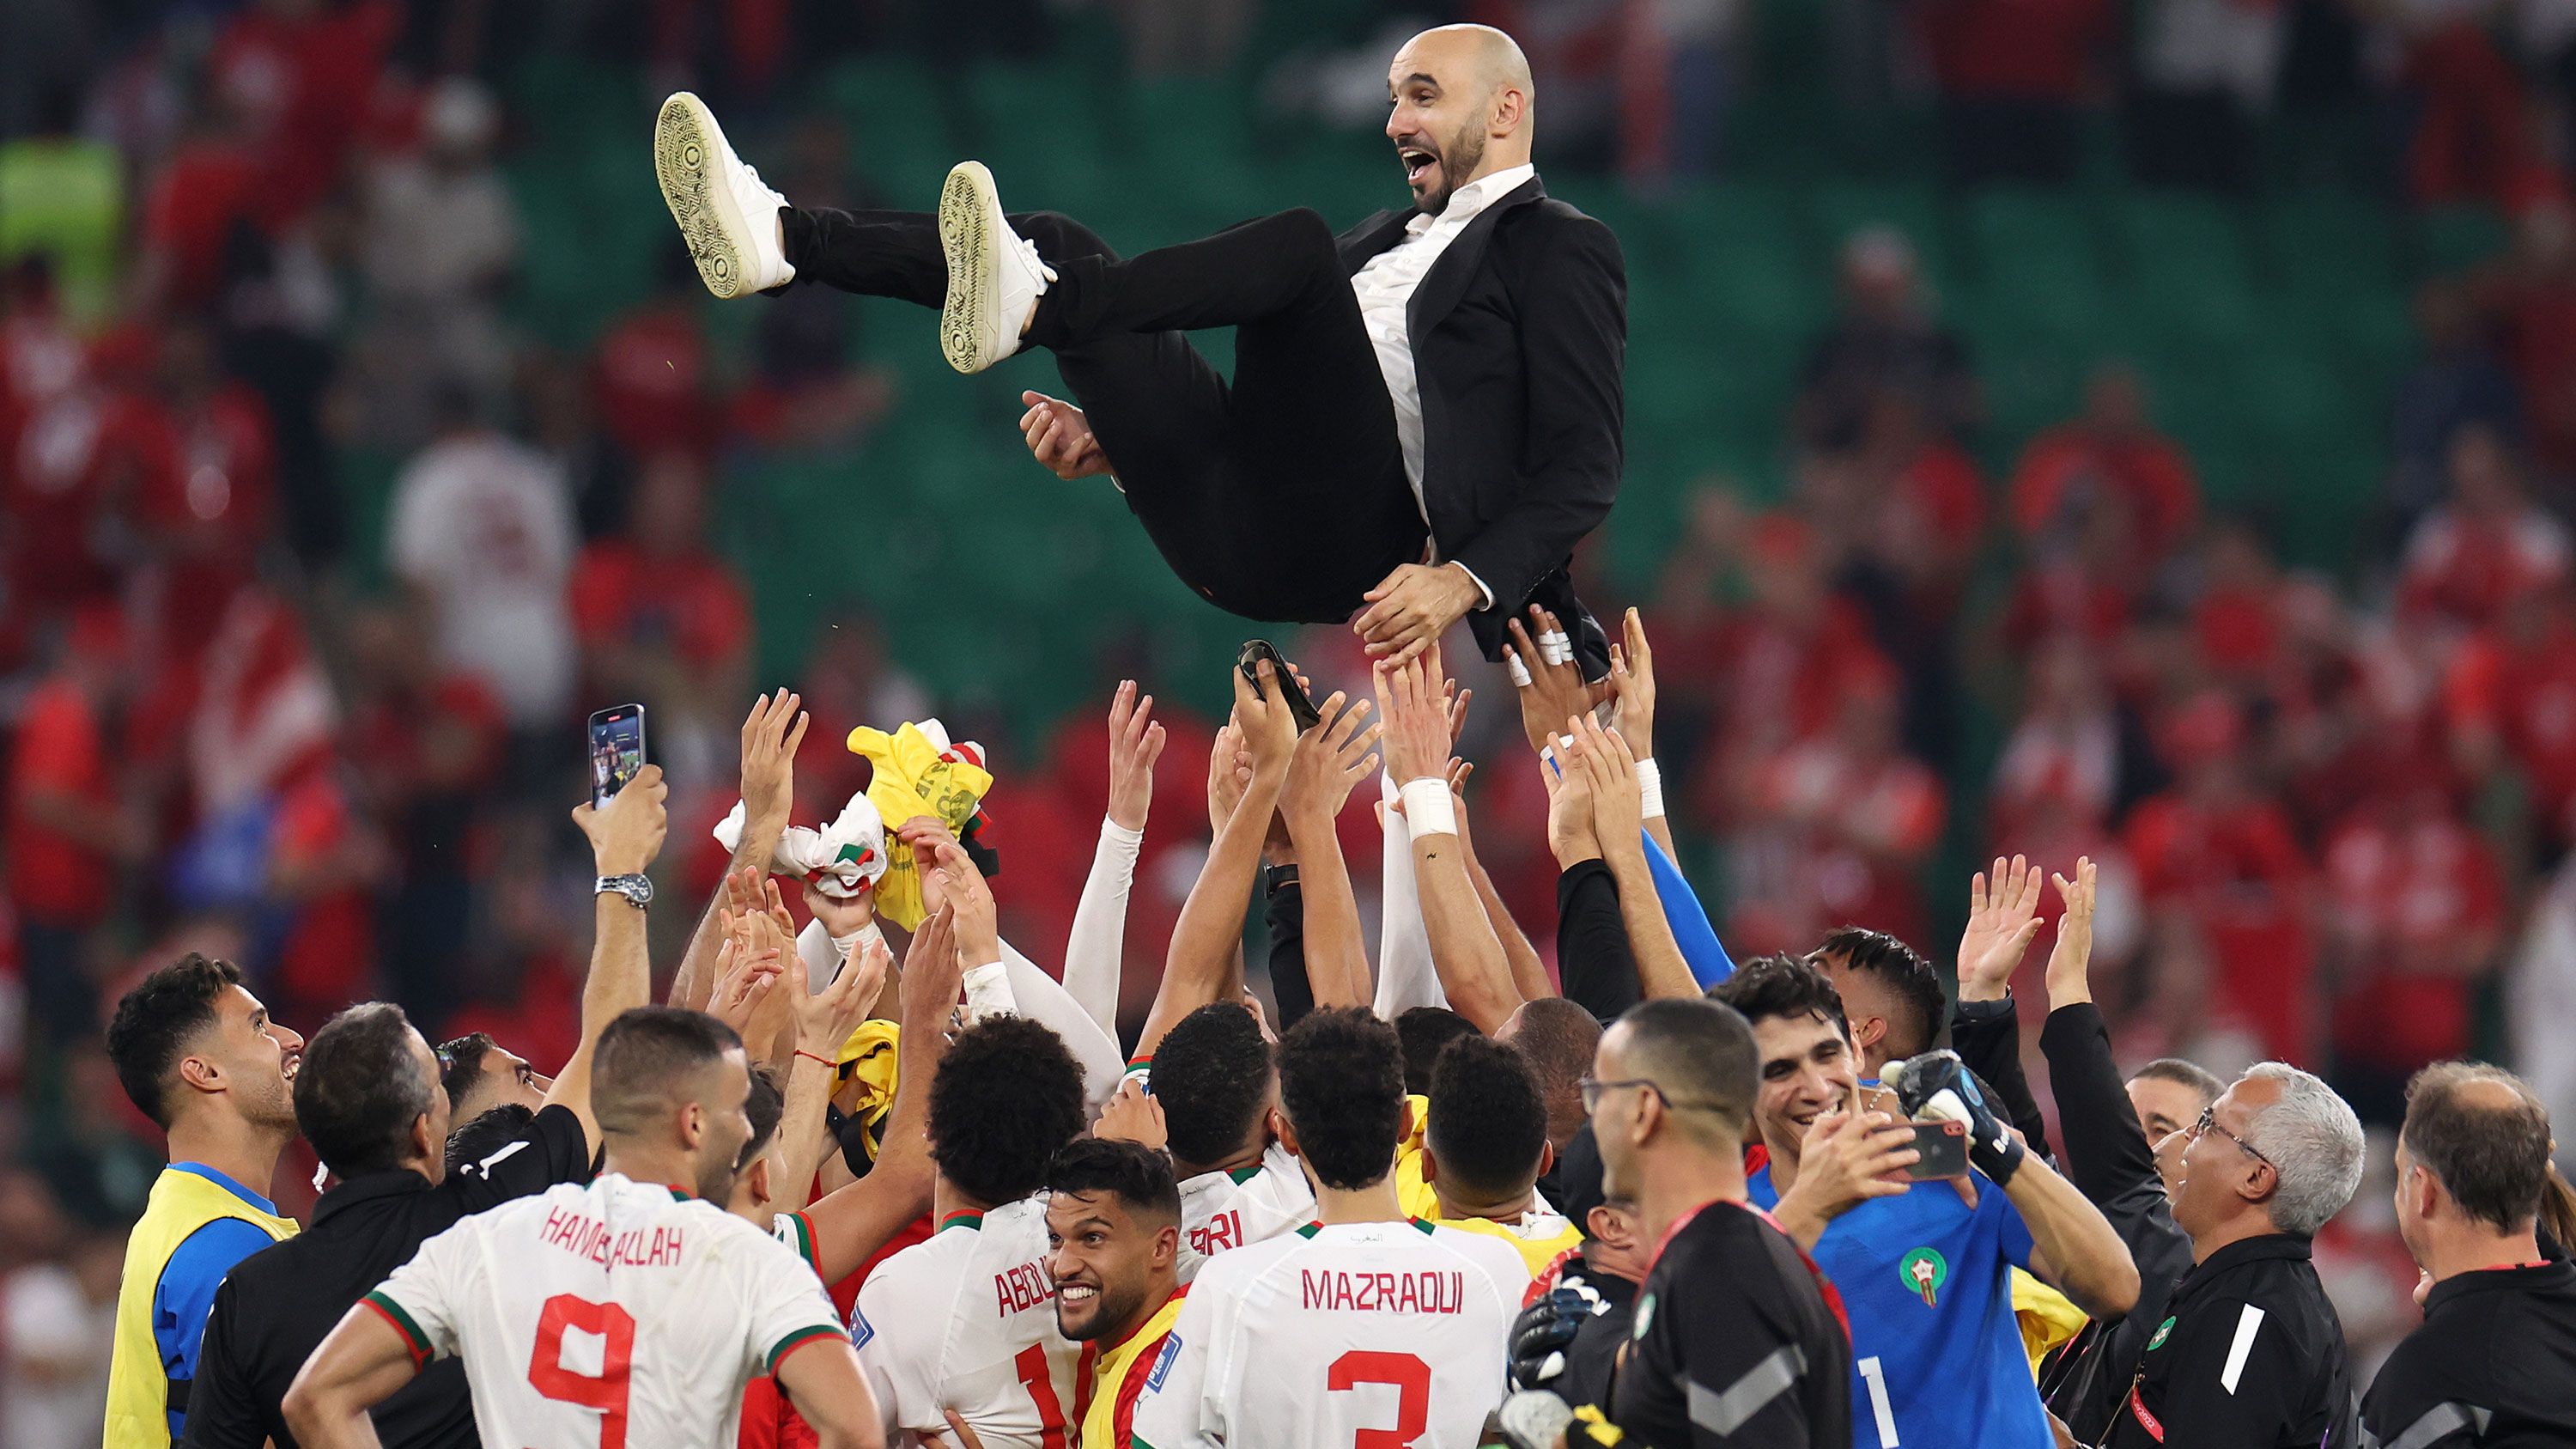 Morocco's World Cup Success Gives Arab Youth A Much Needed Morale Boost